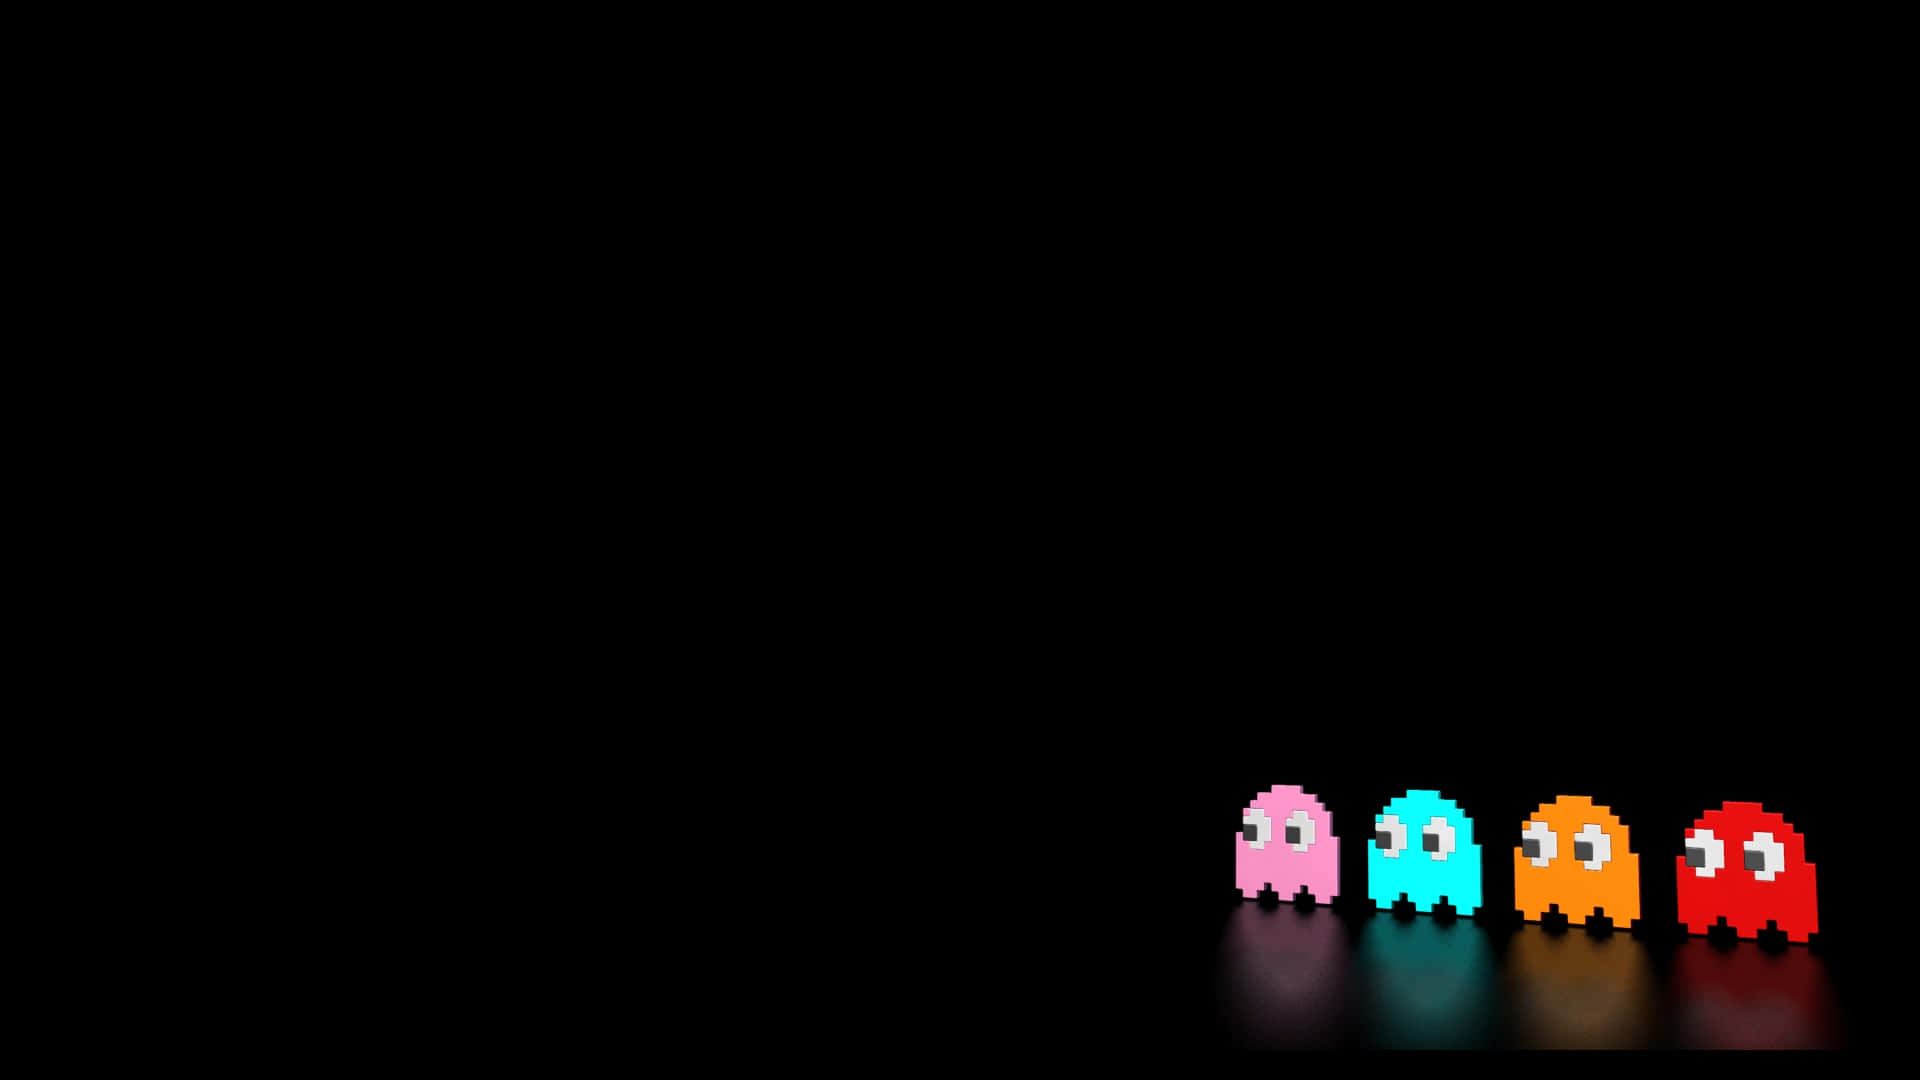 Chase your dreams with PacMan! Wallpaper